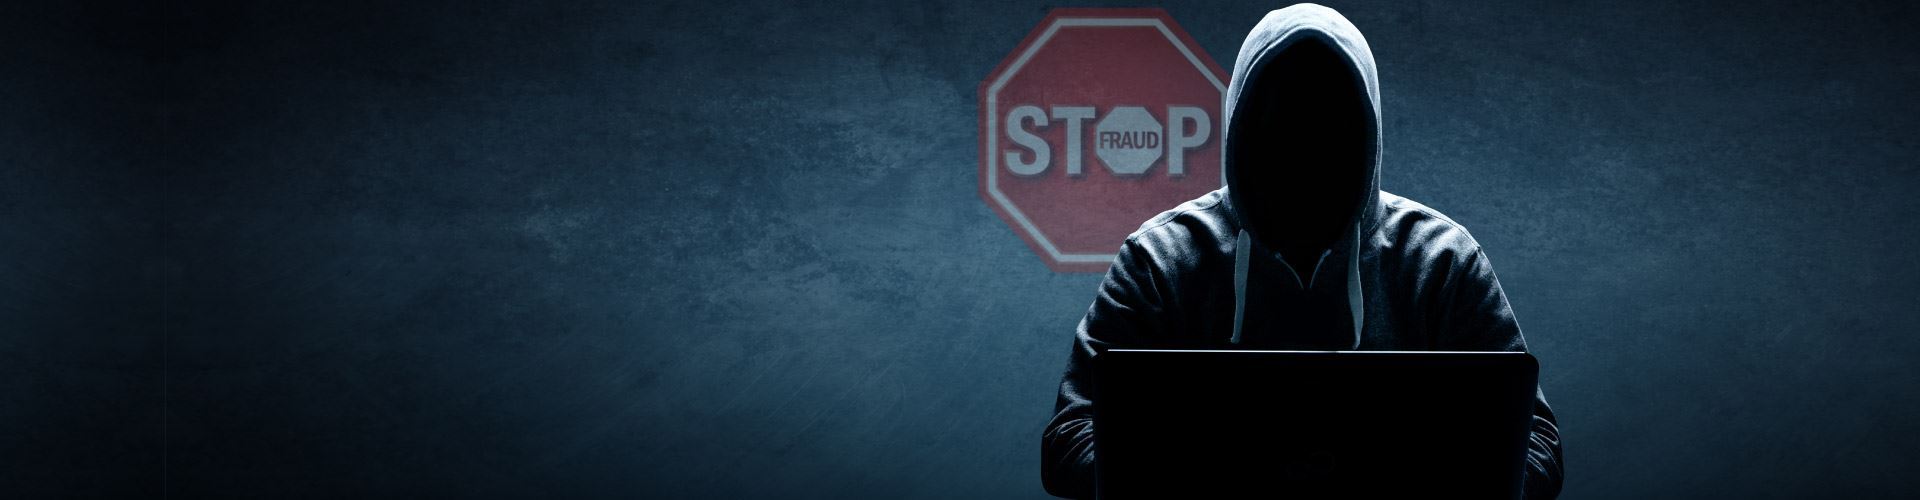 Stop Payment Fraud and protect your business from risk. Cyber criminal/hacker on pc in the dark with Stop Fraud logo behind him.